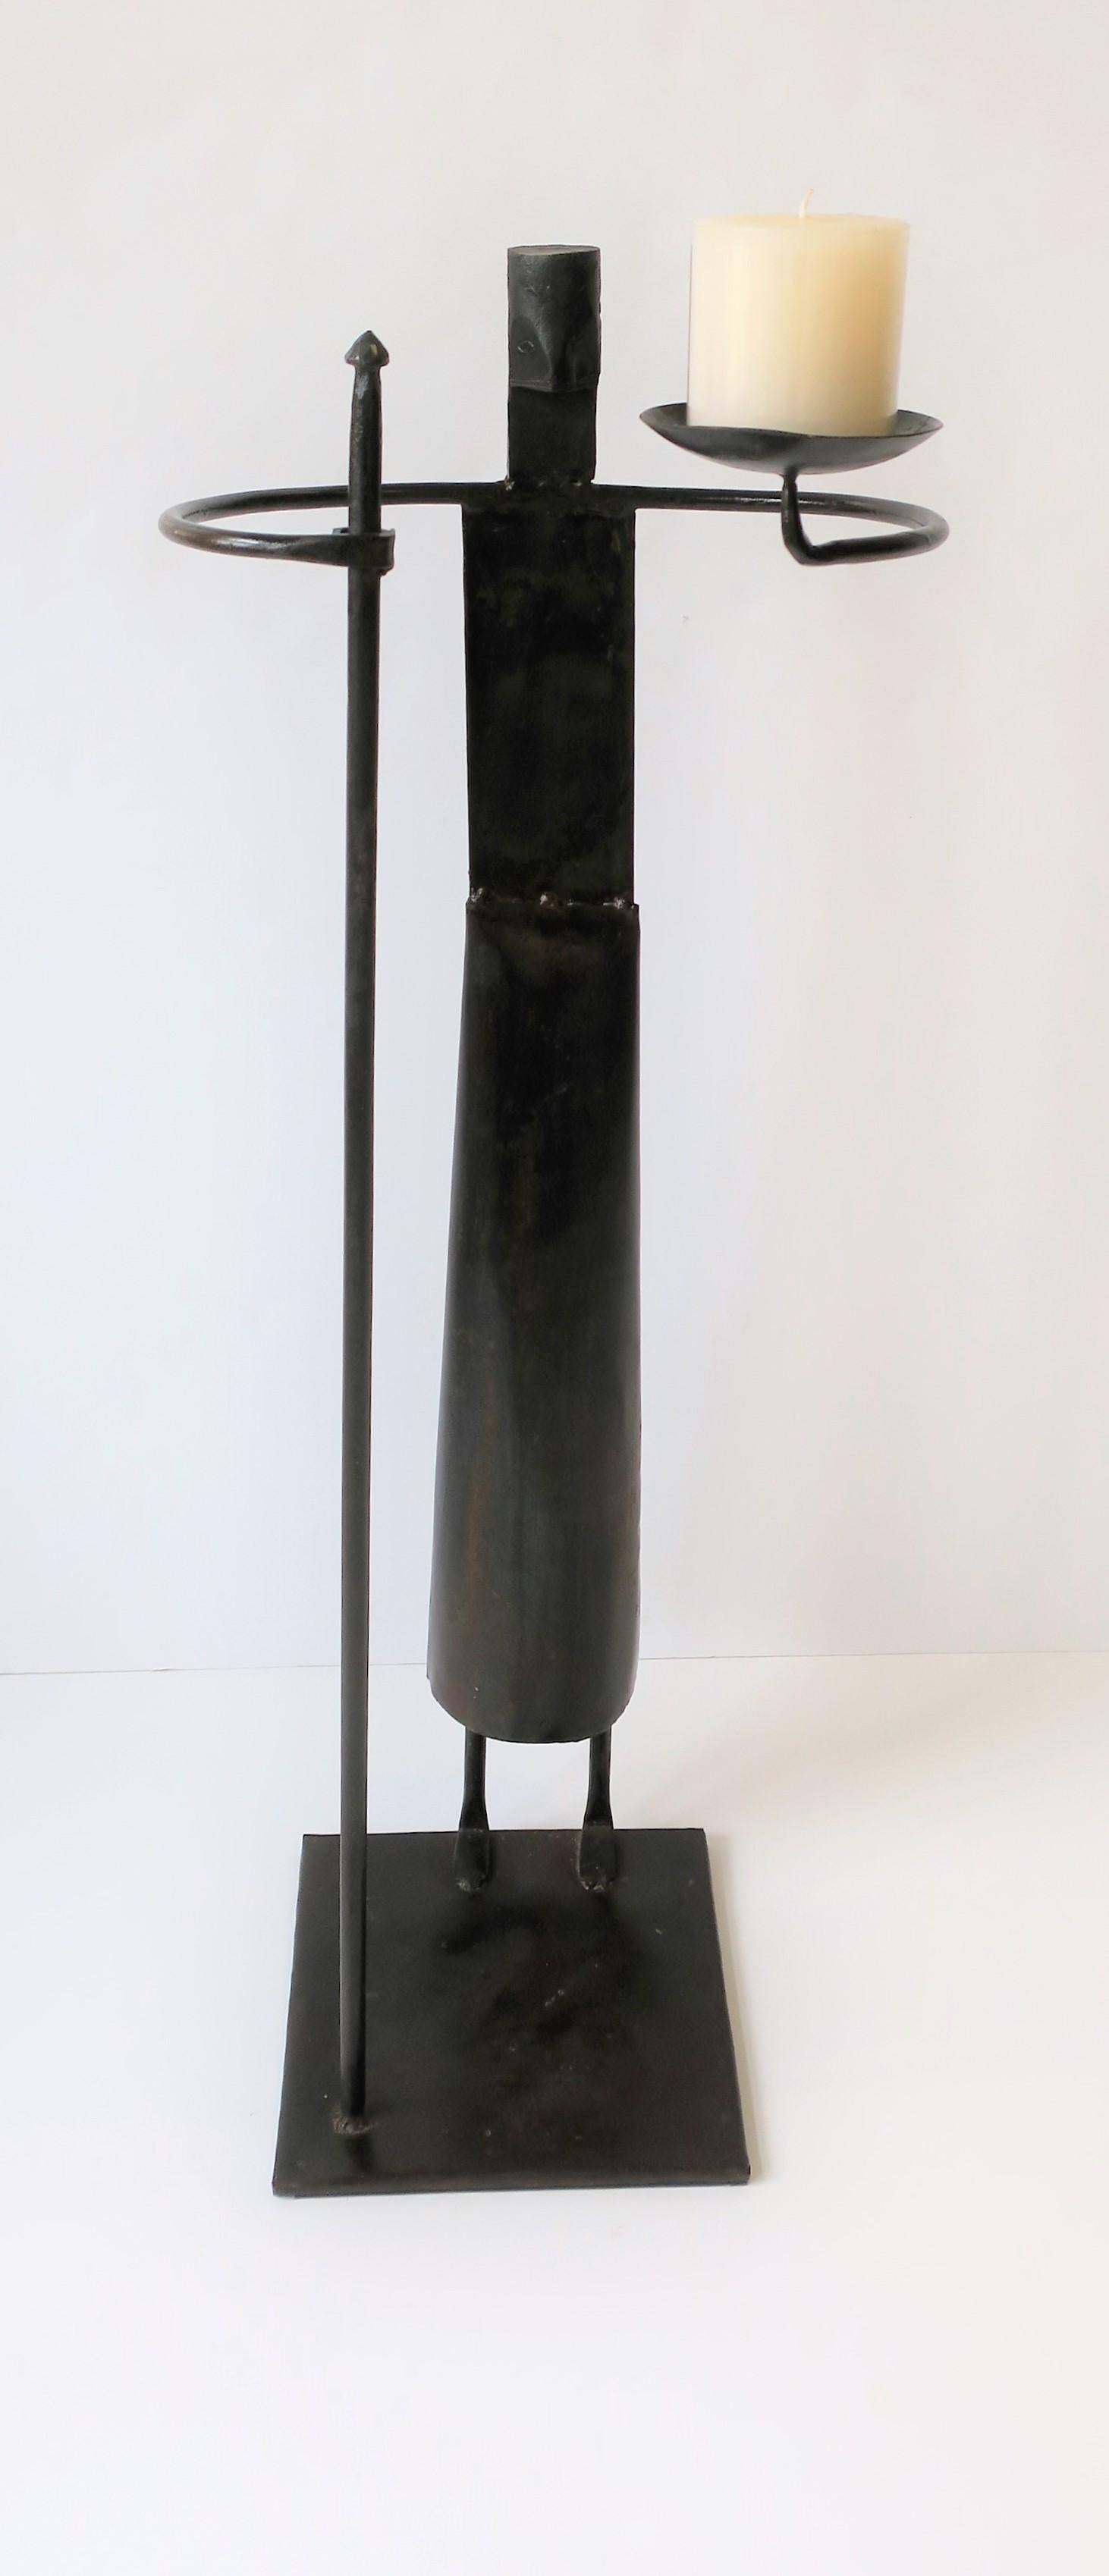 A standing handcrafted indoor or outdoor Primitive or tribal metal sculpture piece with spear and light (candle.) This a special handcrafted metal figurative sculpture piece, a 'warrior' of sorts, that could work well indoors or outdoors (patio,